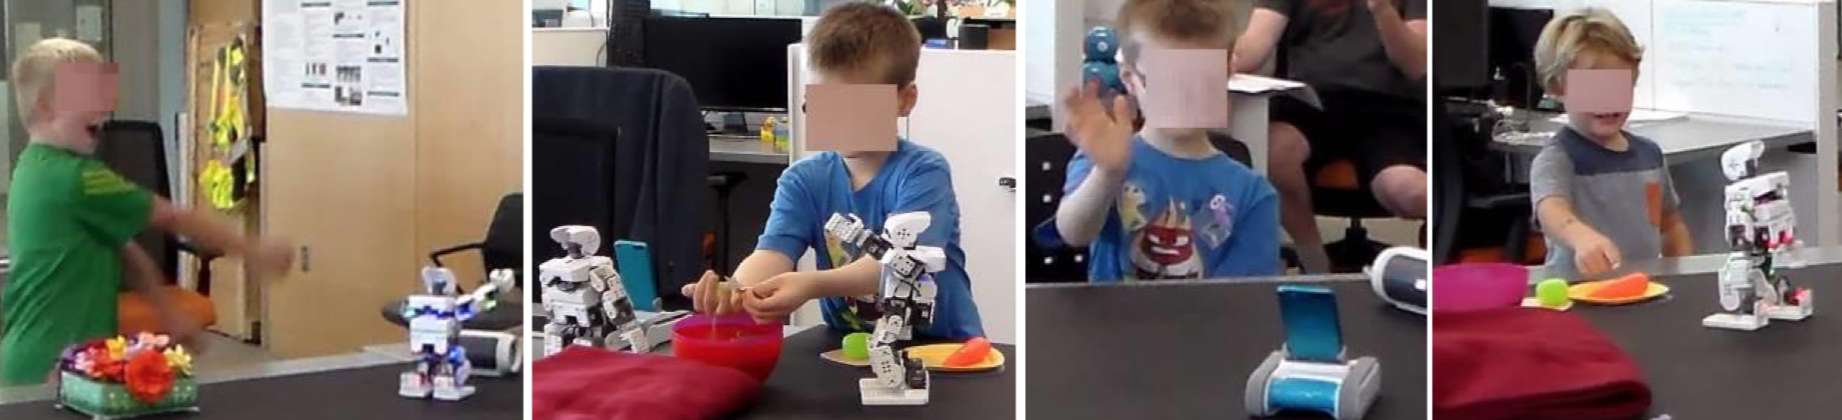 Robot helps autistic kids engage